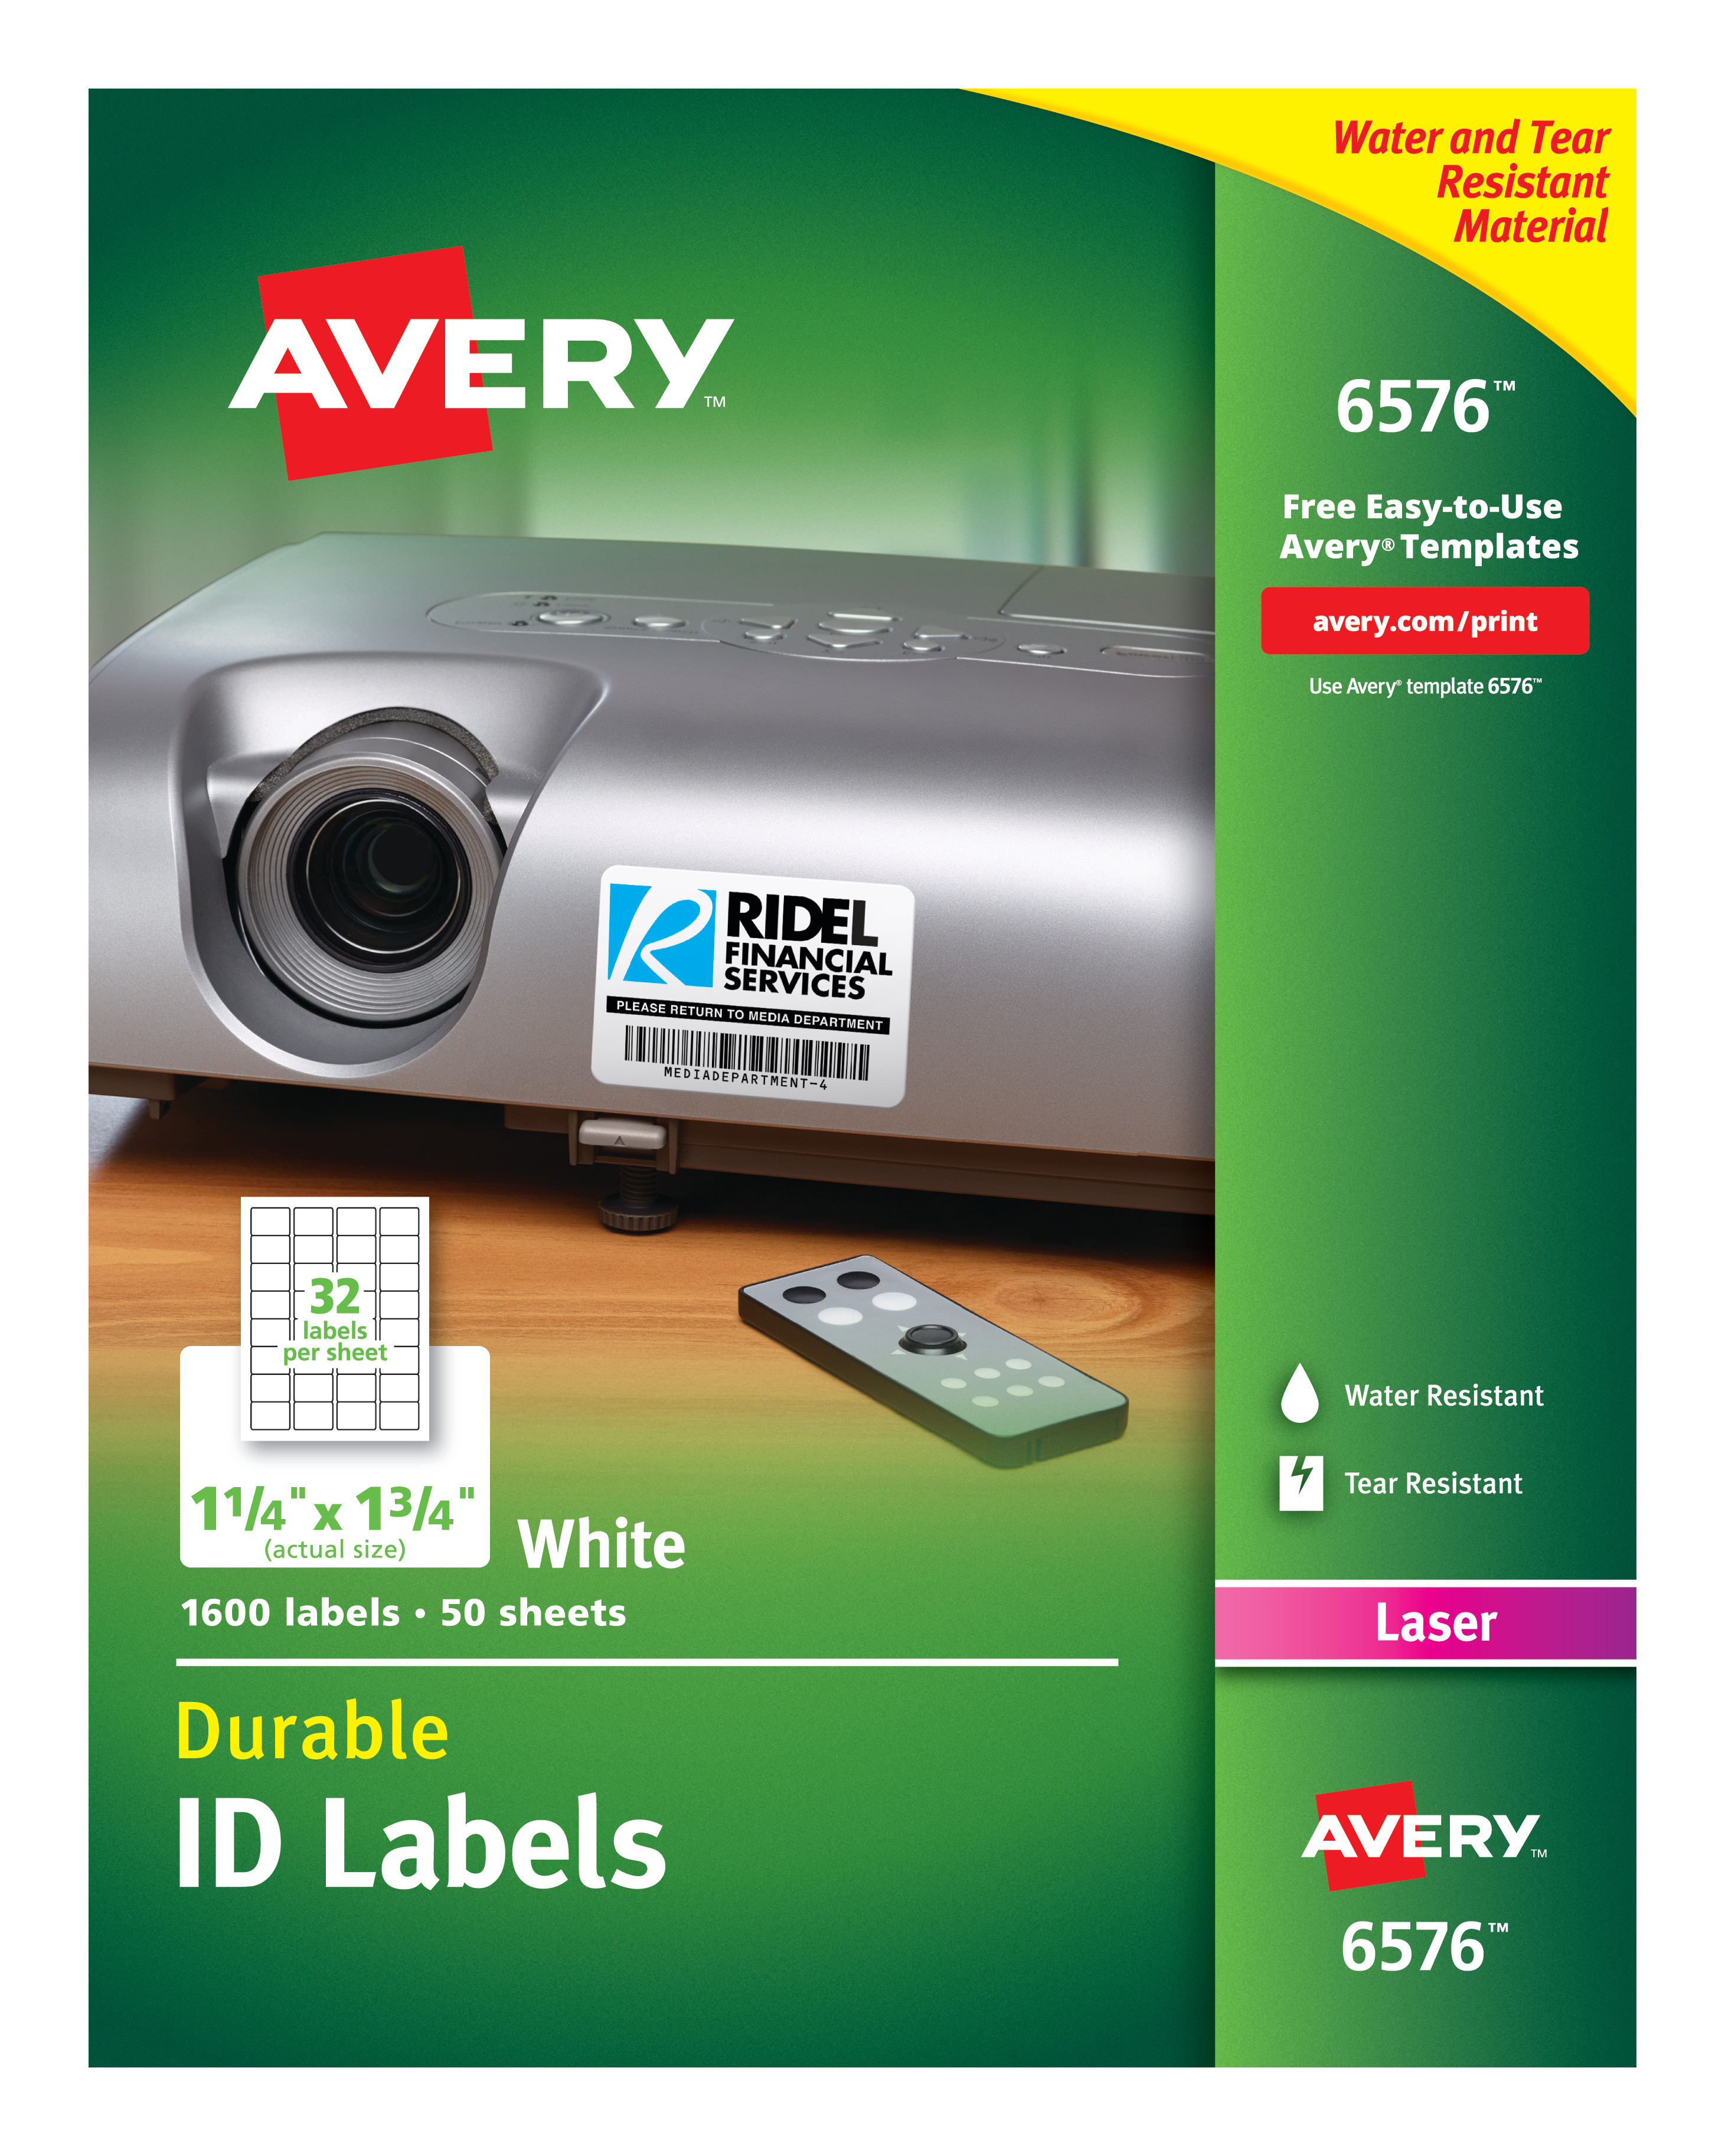 Avery 6576 labels